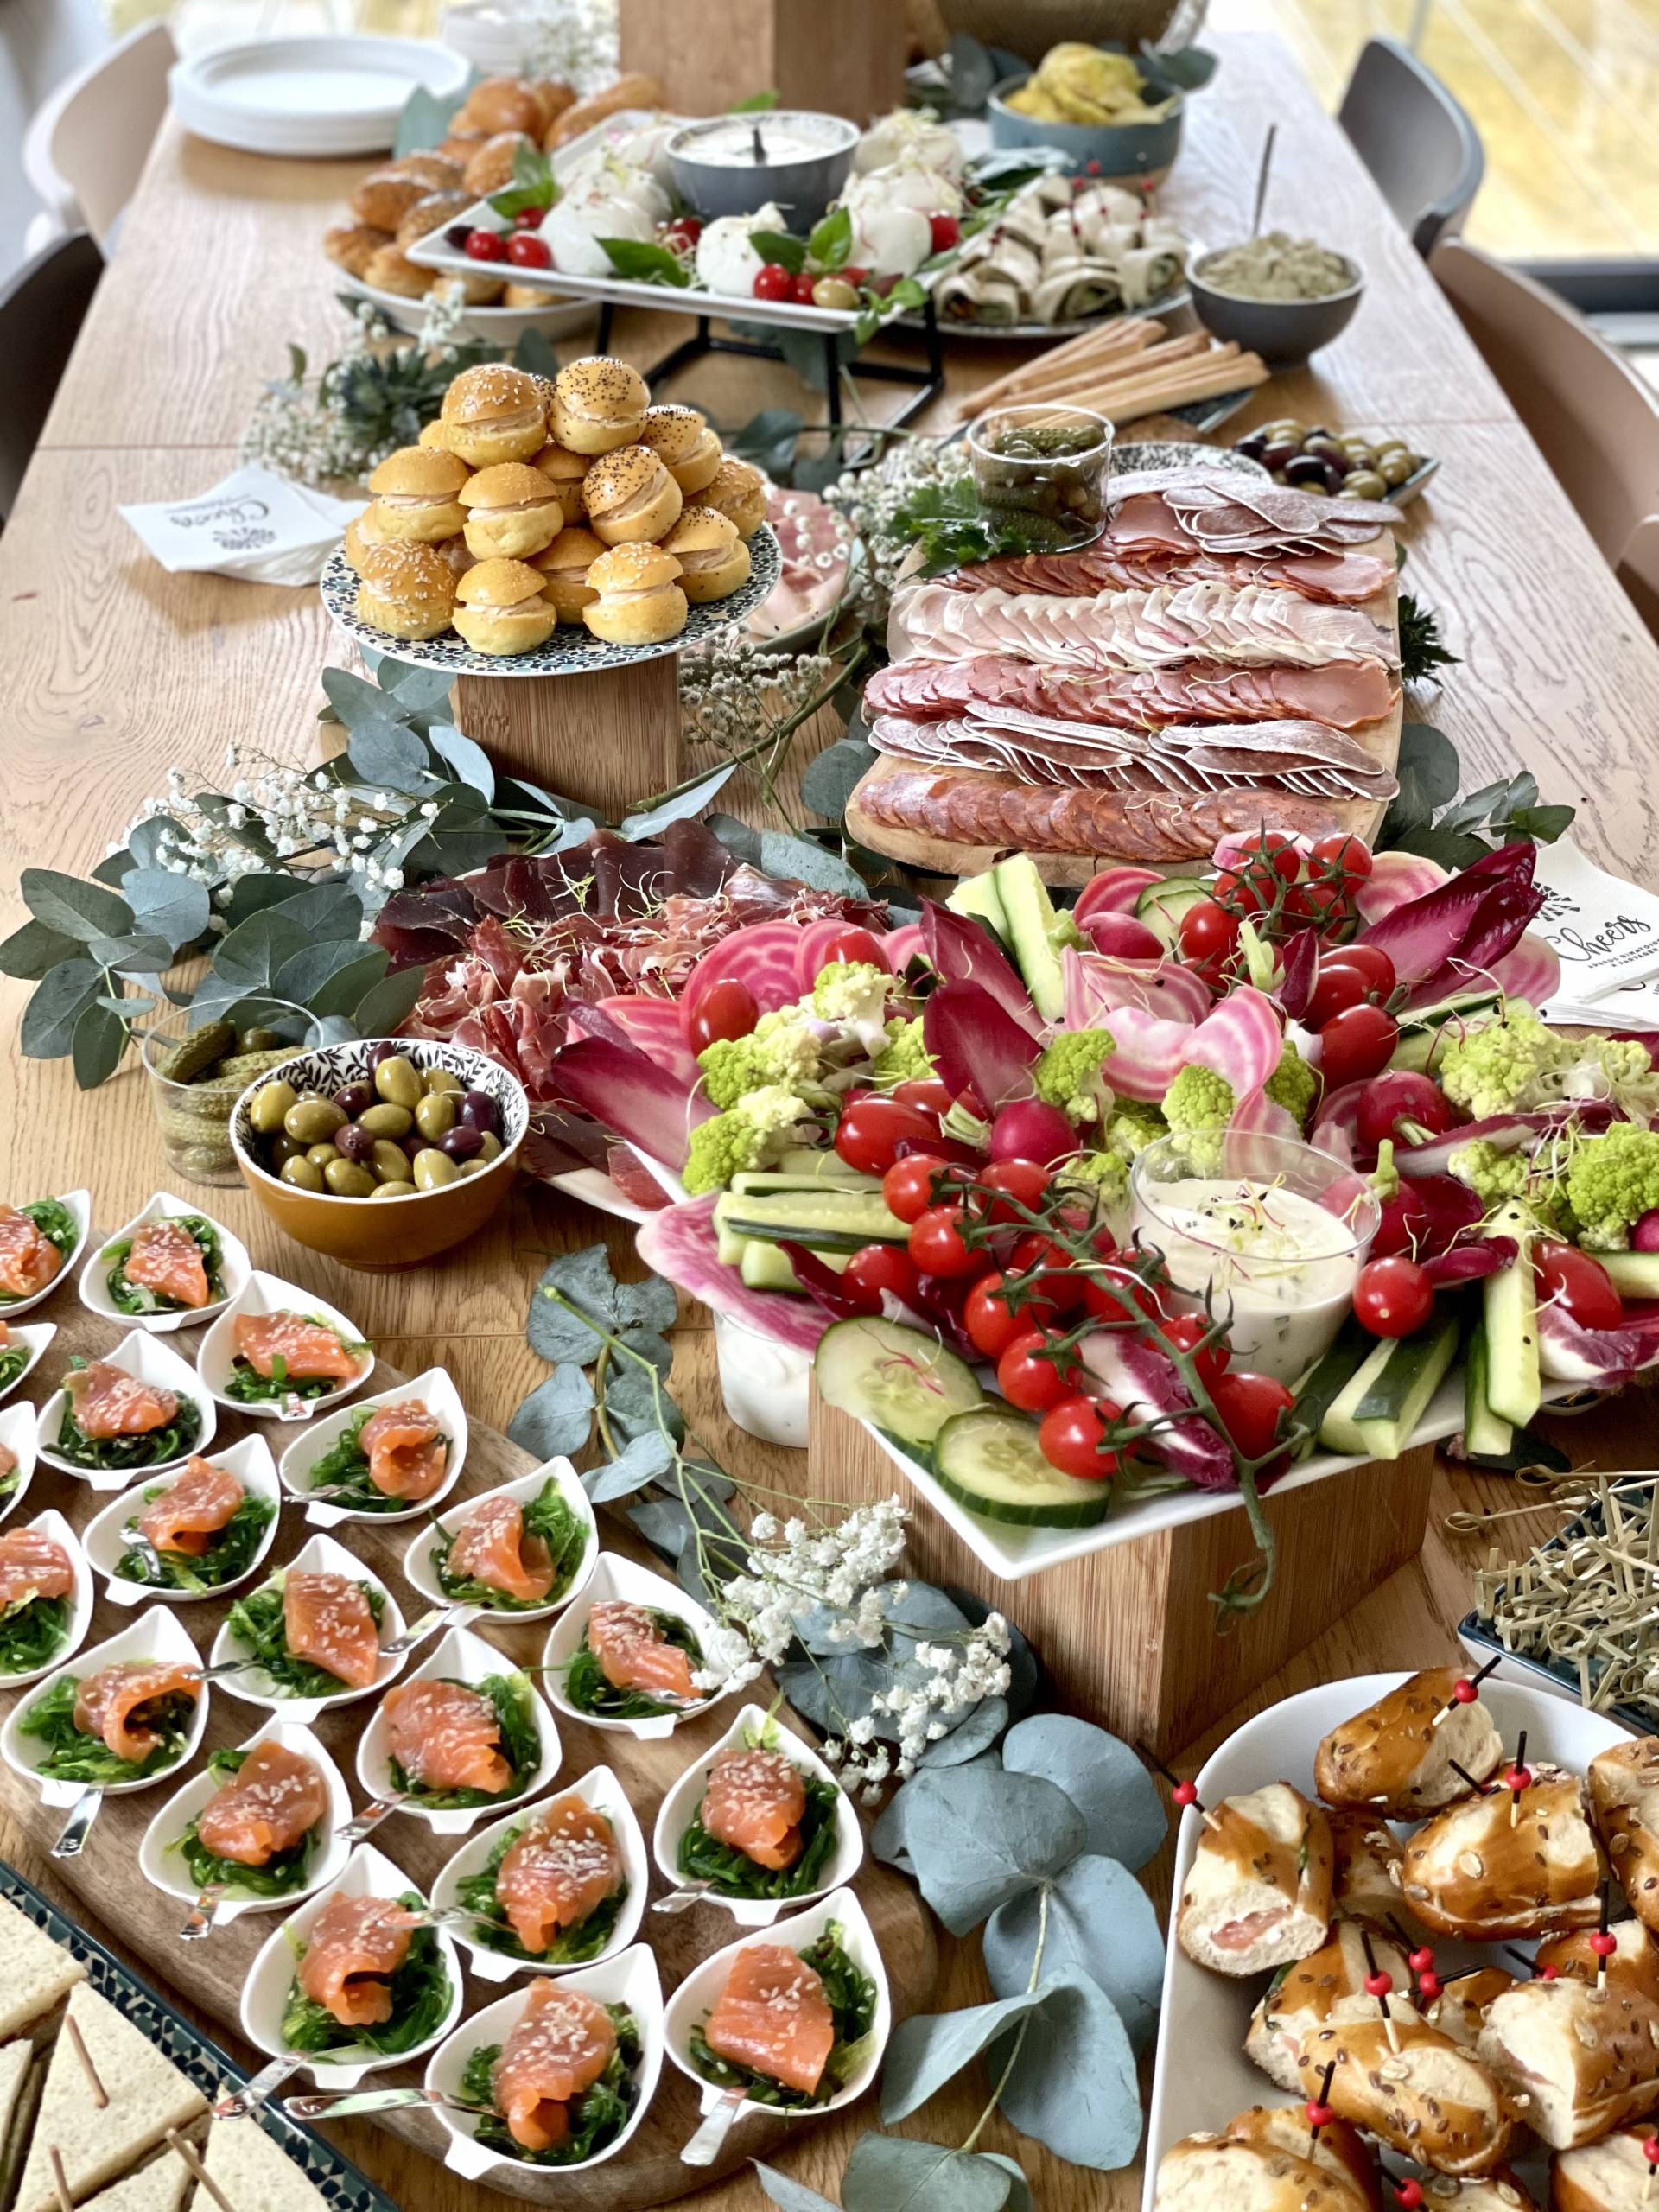 GRAZING TABLE